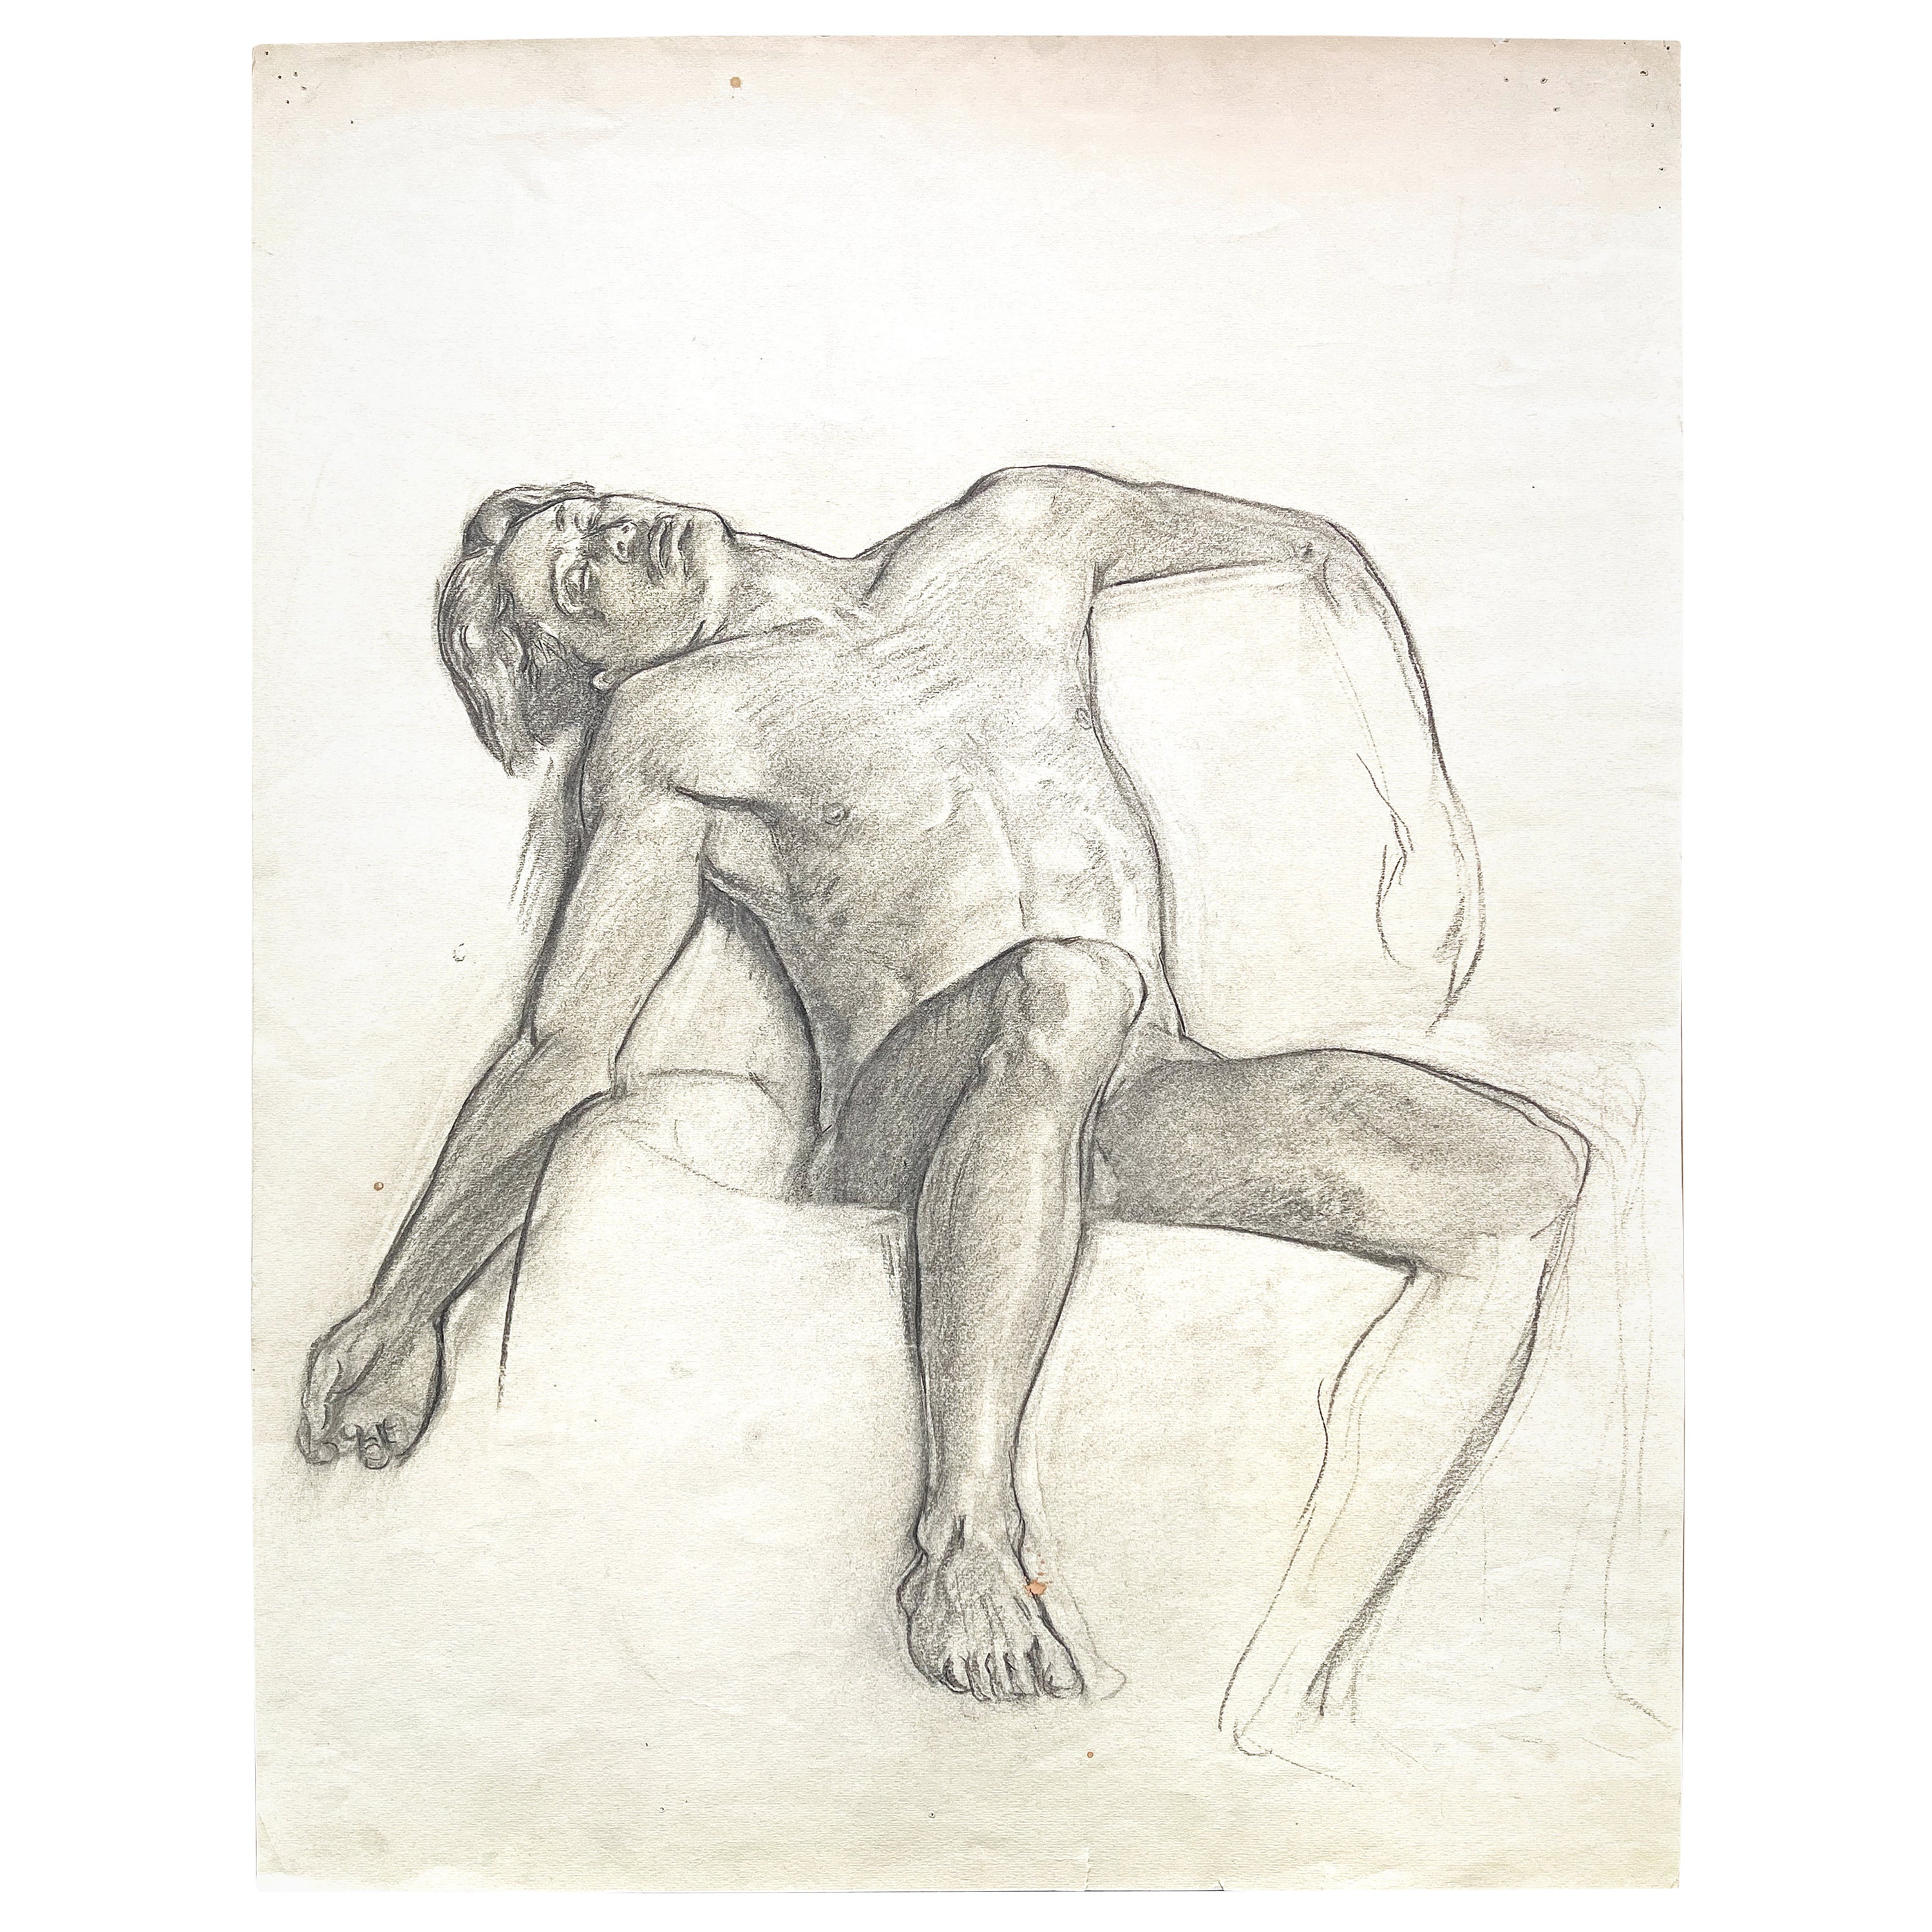 "Sleeping Nude, Arms Akimbo, " Masterful Drawing by Allyn Cox, Capitol Muralist For Sale